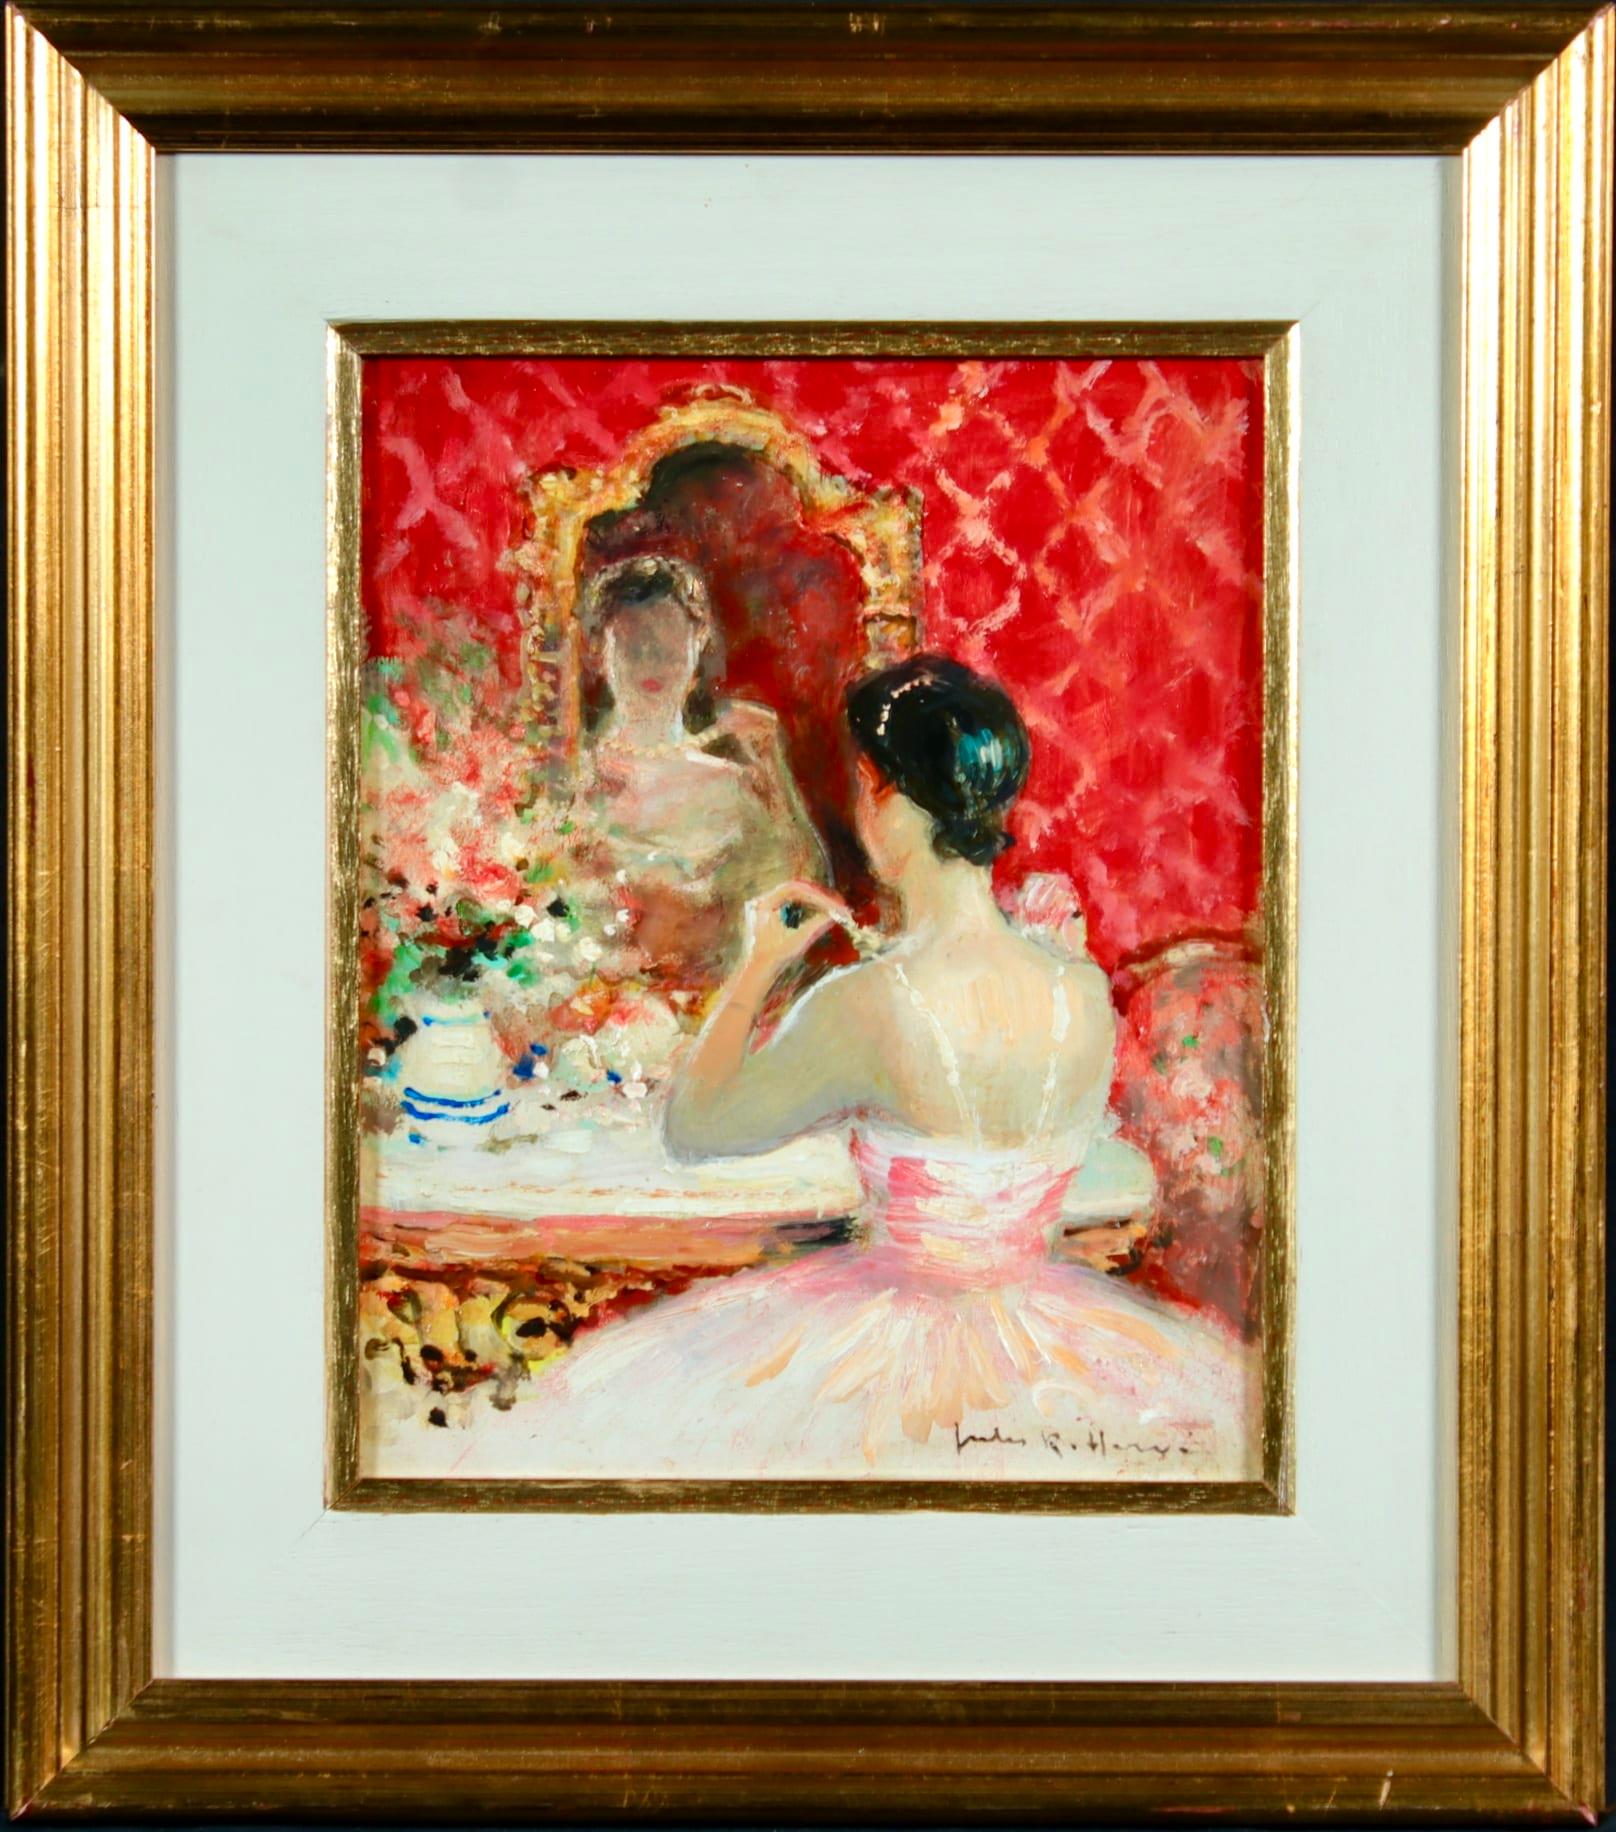 Danseuse a sa Toilette - Post Impressionist Oil, Figure in Interior by J R Herve - Painting by Jules René Hervé